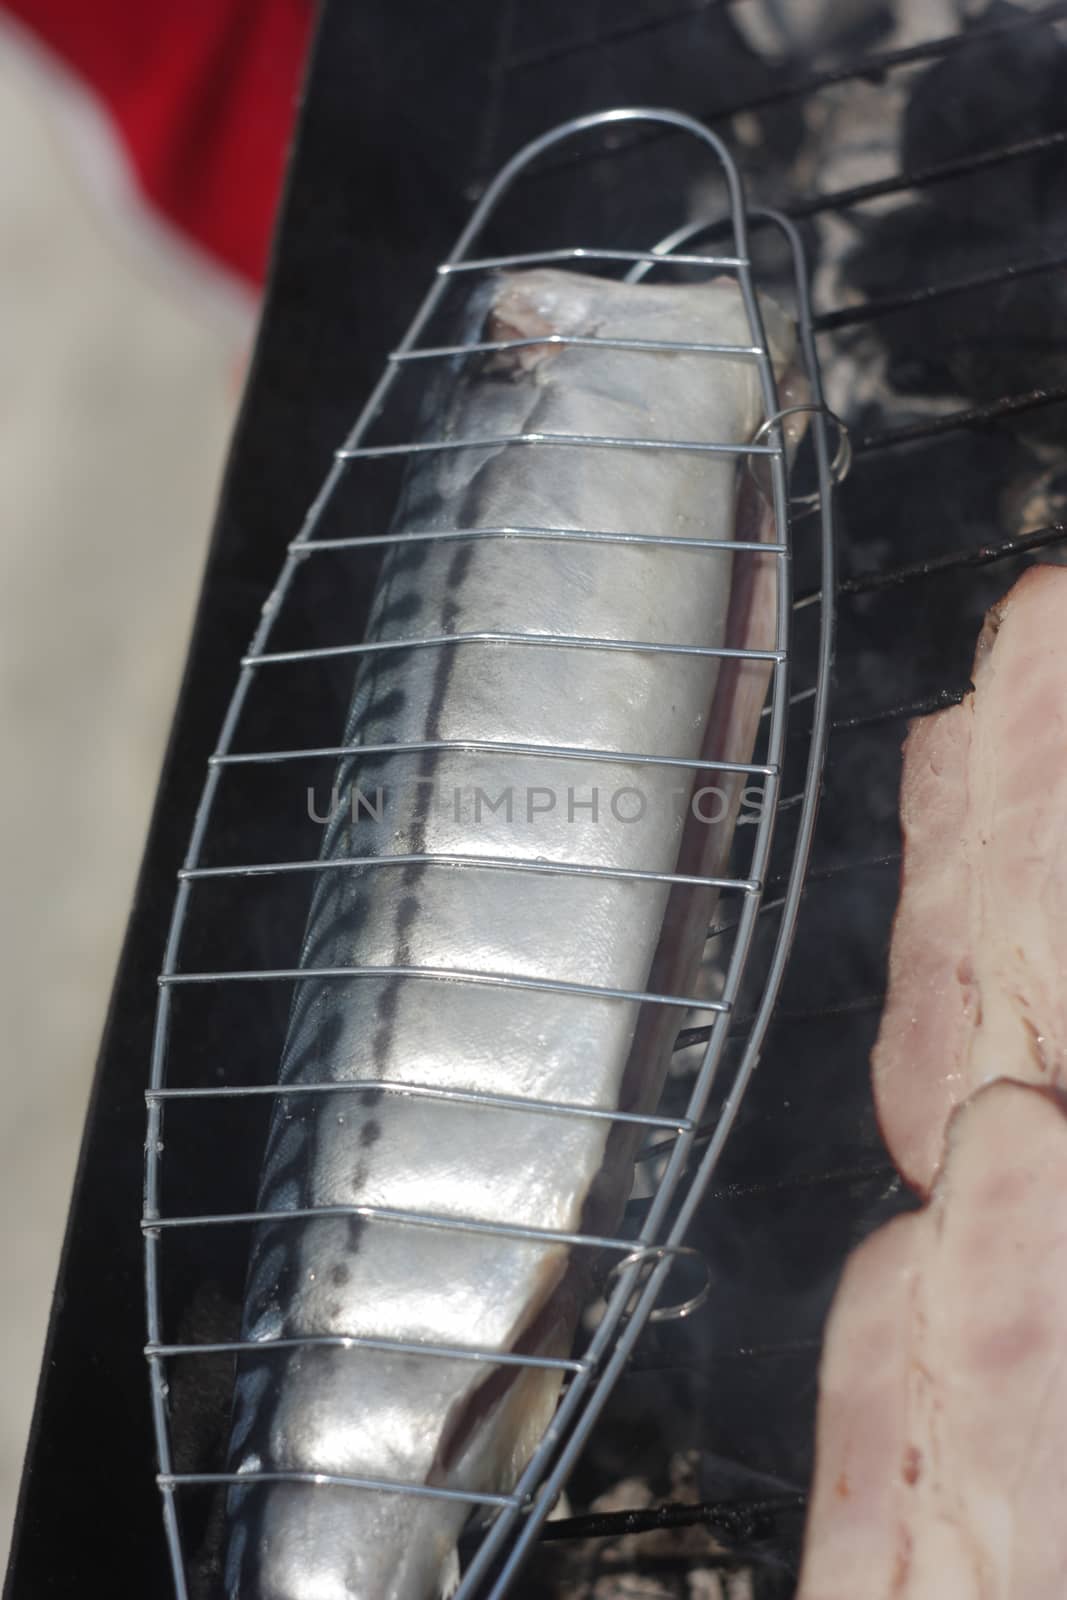 Barbecuing mackerel on charcoal fire closeup image. by eicvl5